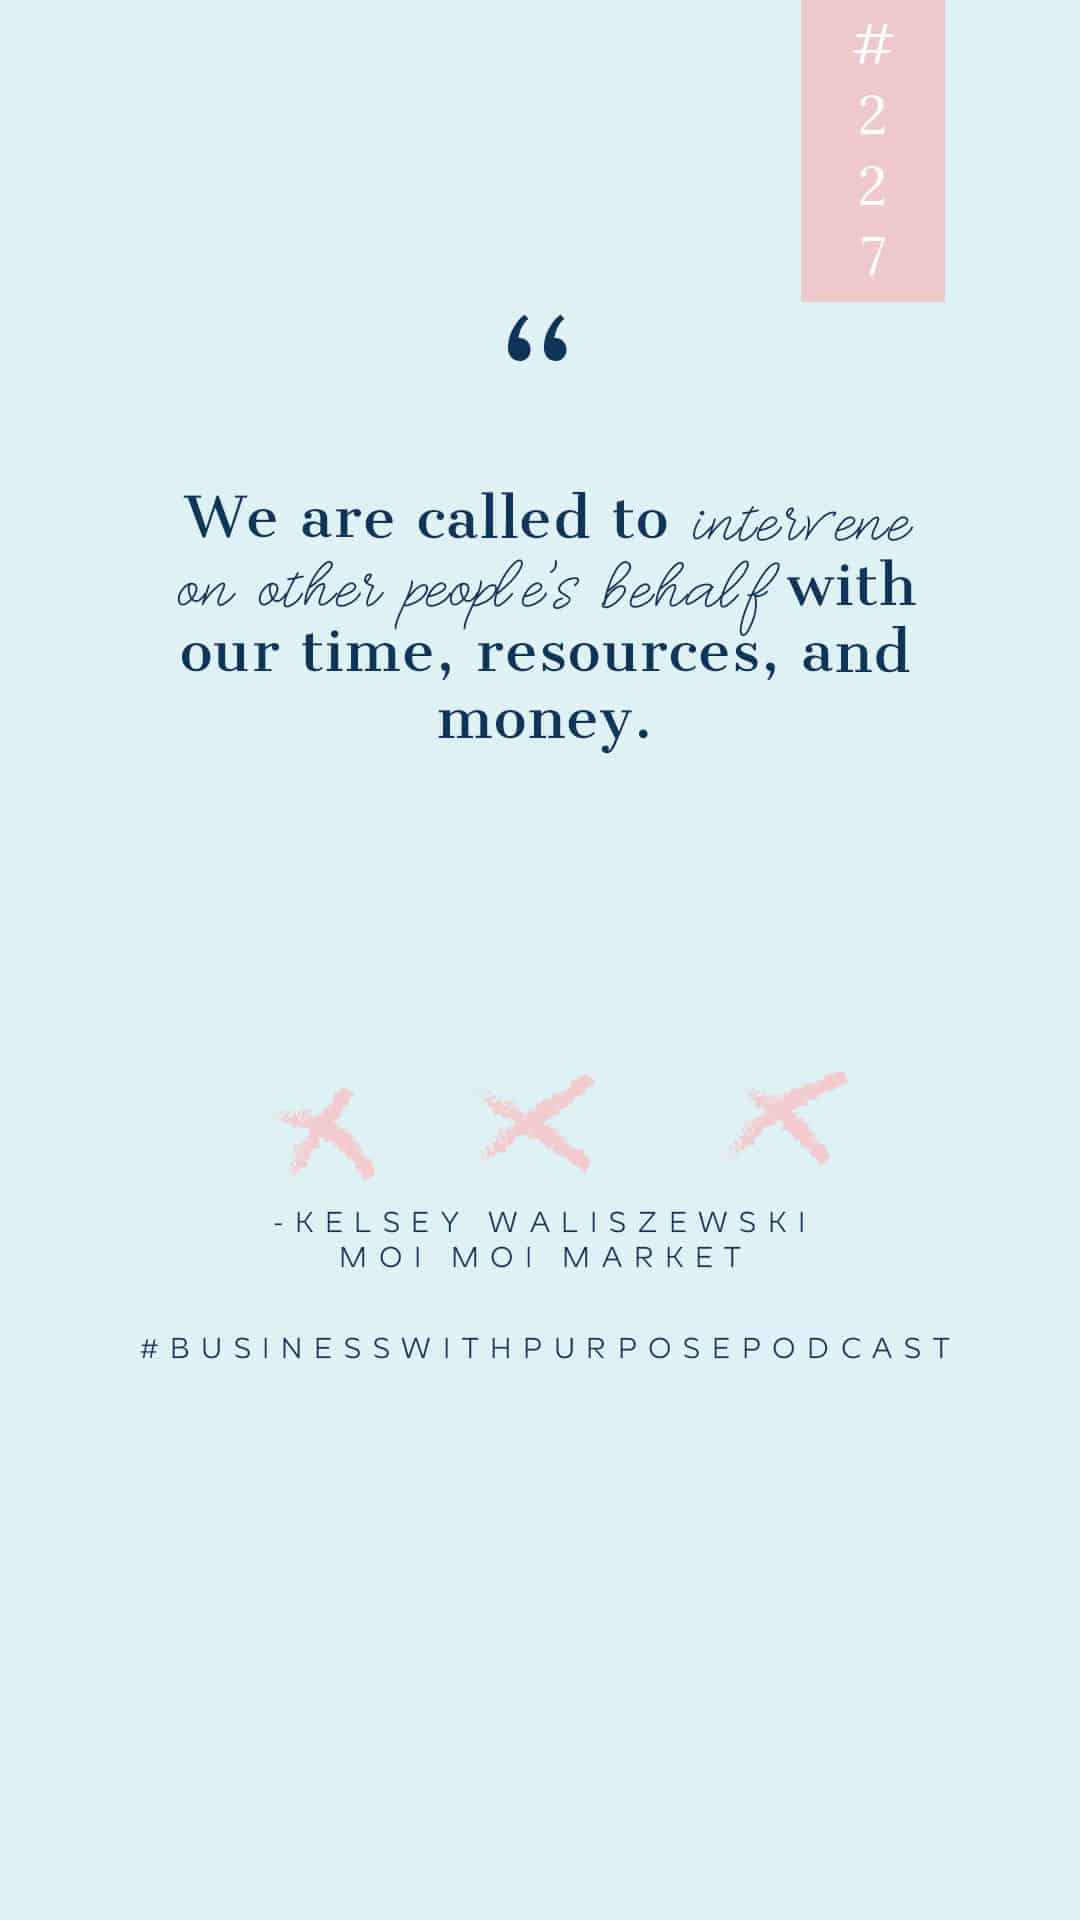 How Whales Inspired Her to Start an Ethical Business | Business with Purpose Podcast EP 227: Kelsey Waliszewski, Moi Moi Market